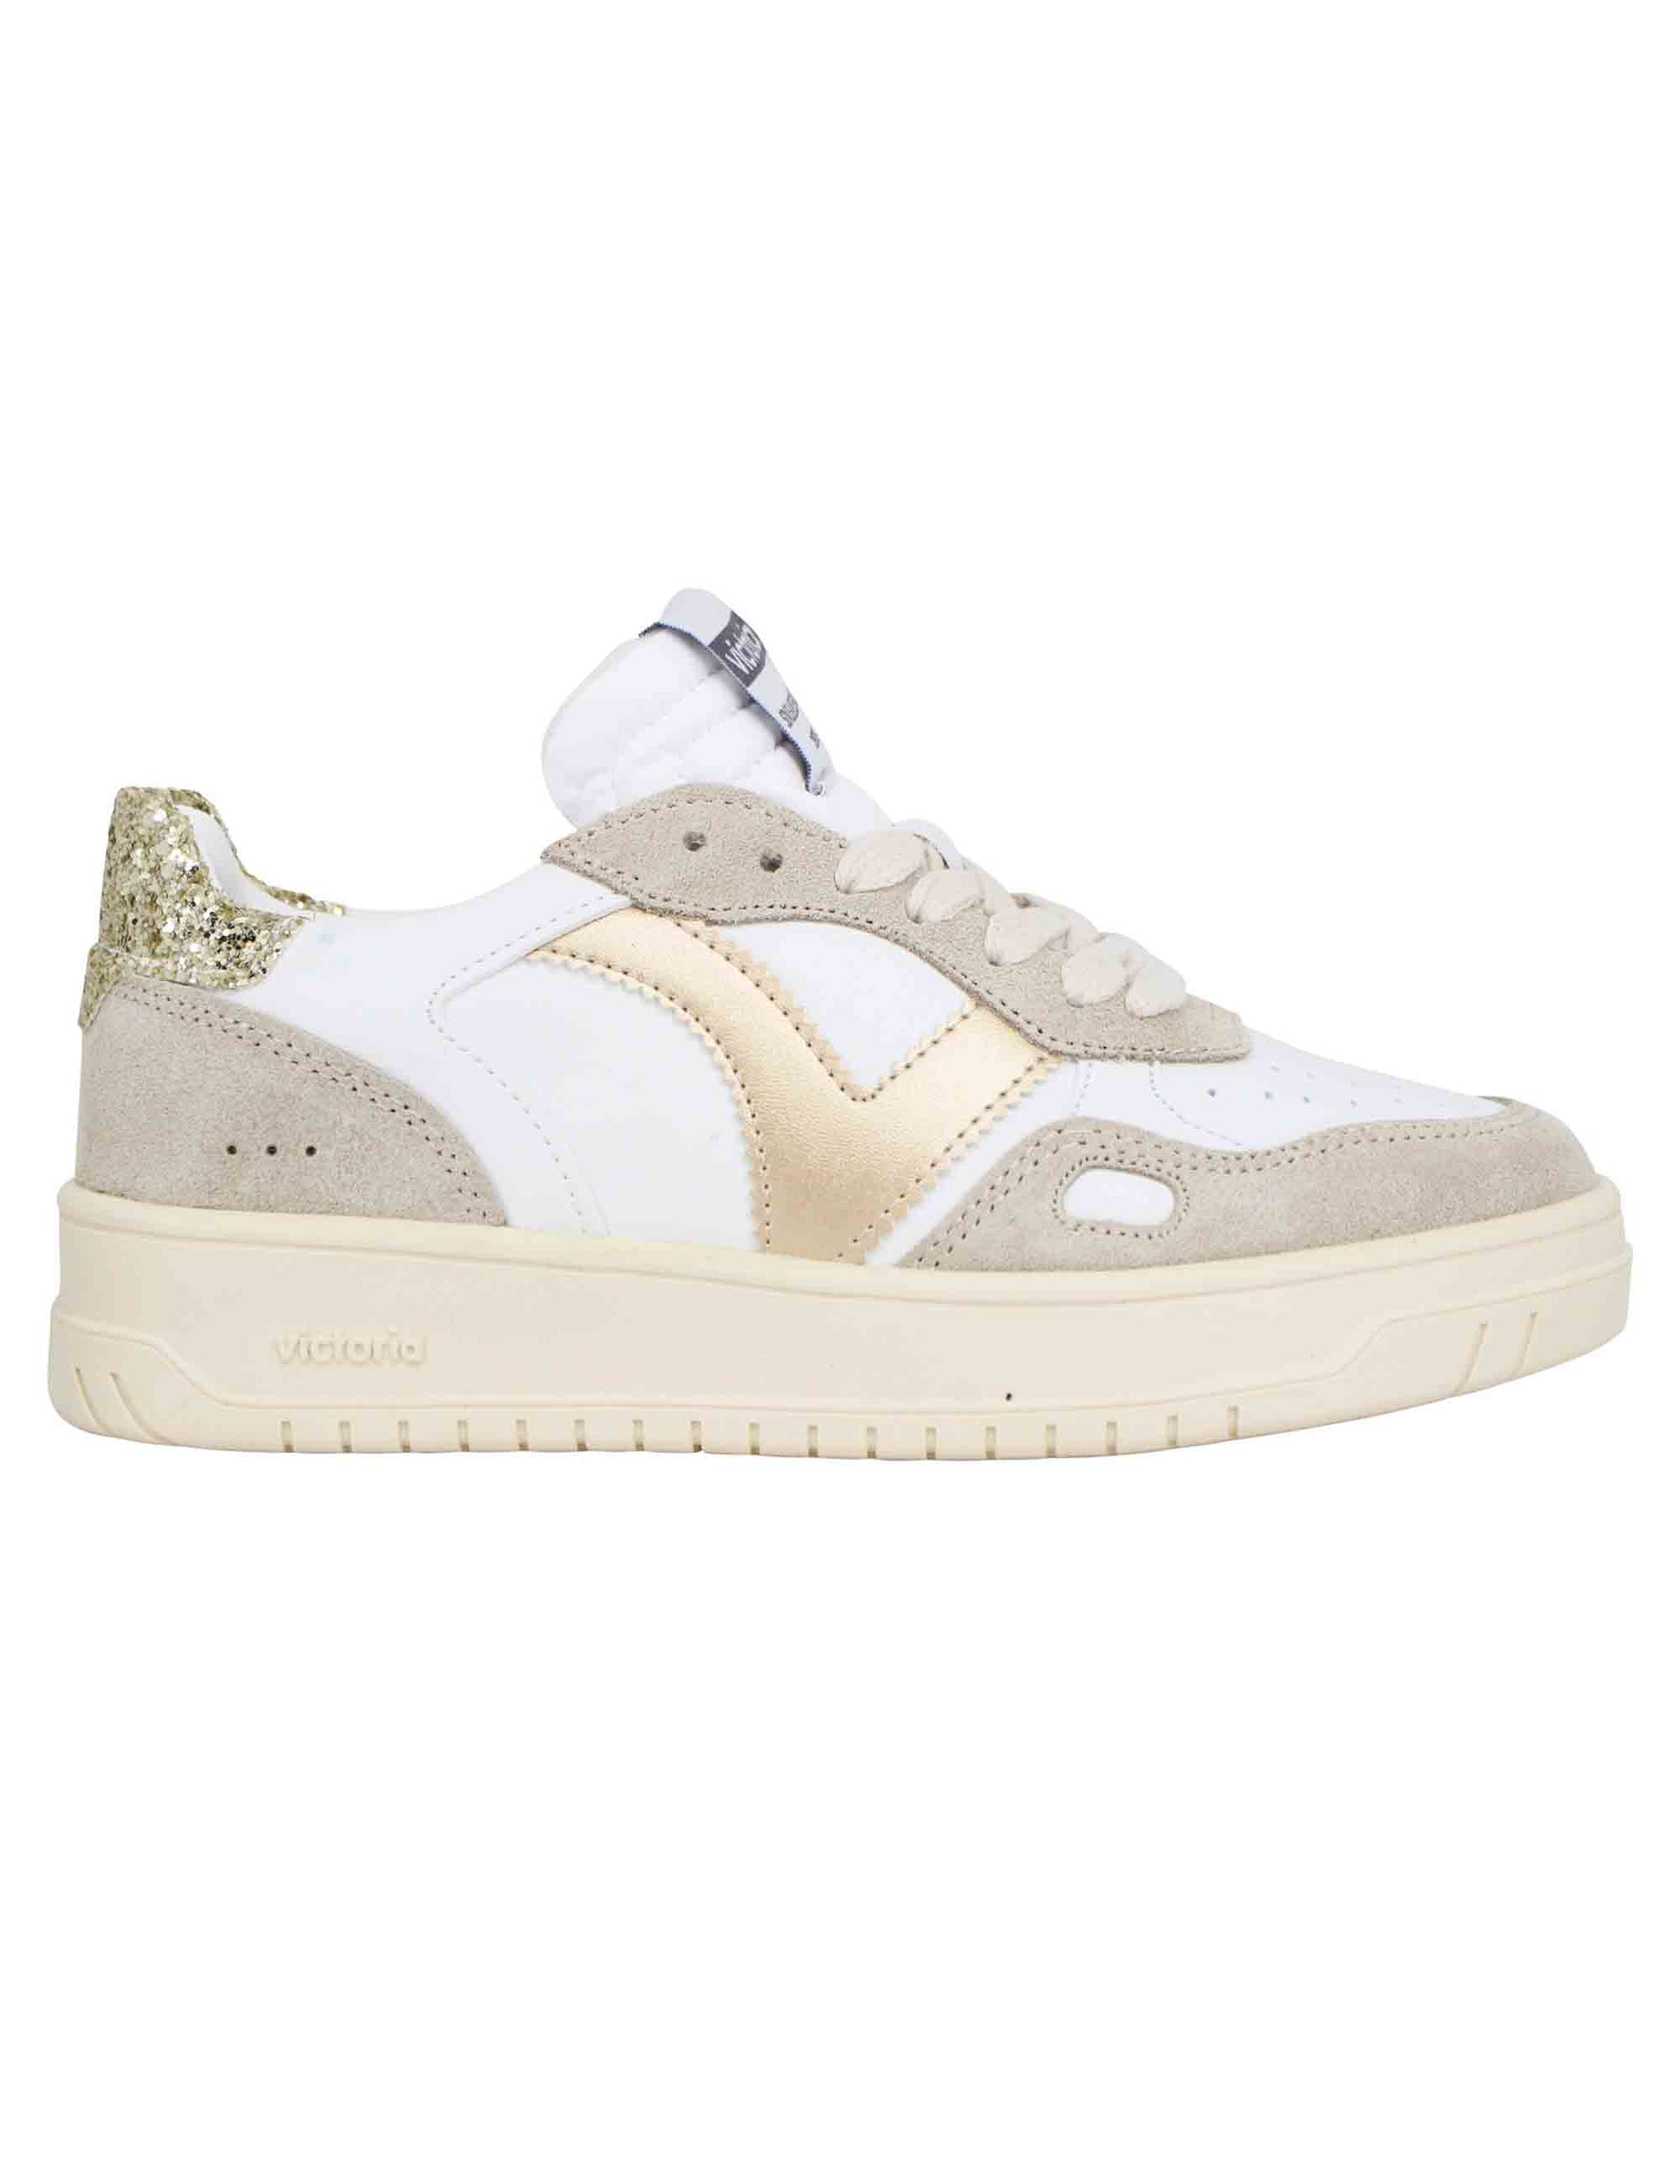 Women's sneakers in white leather with platinum inserts and beige suede